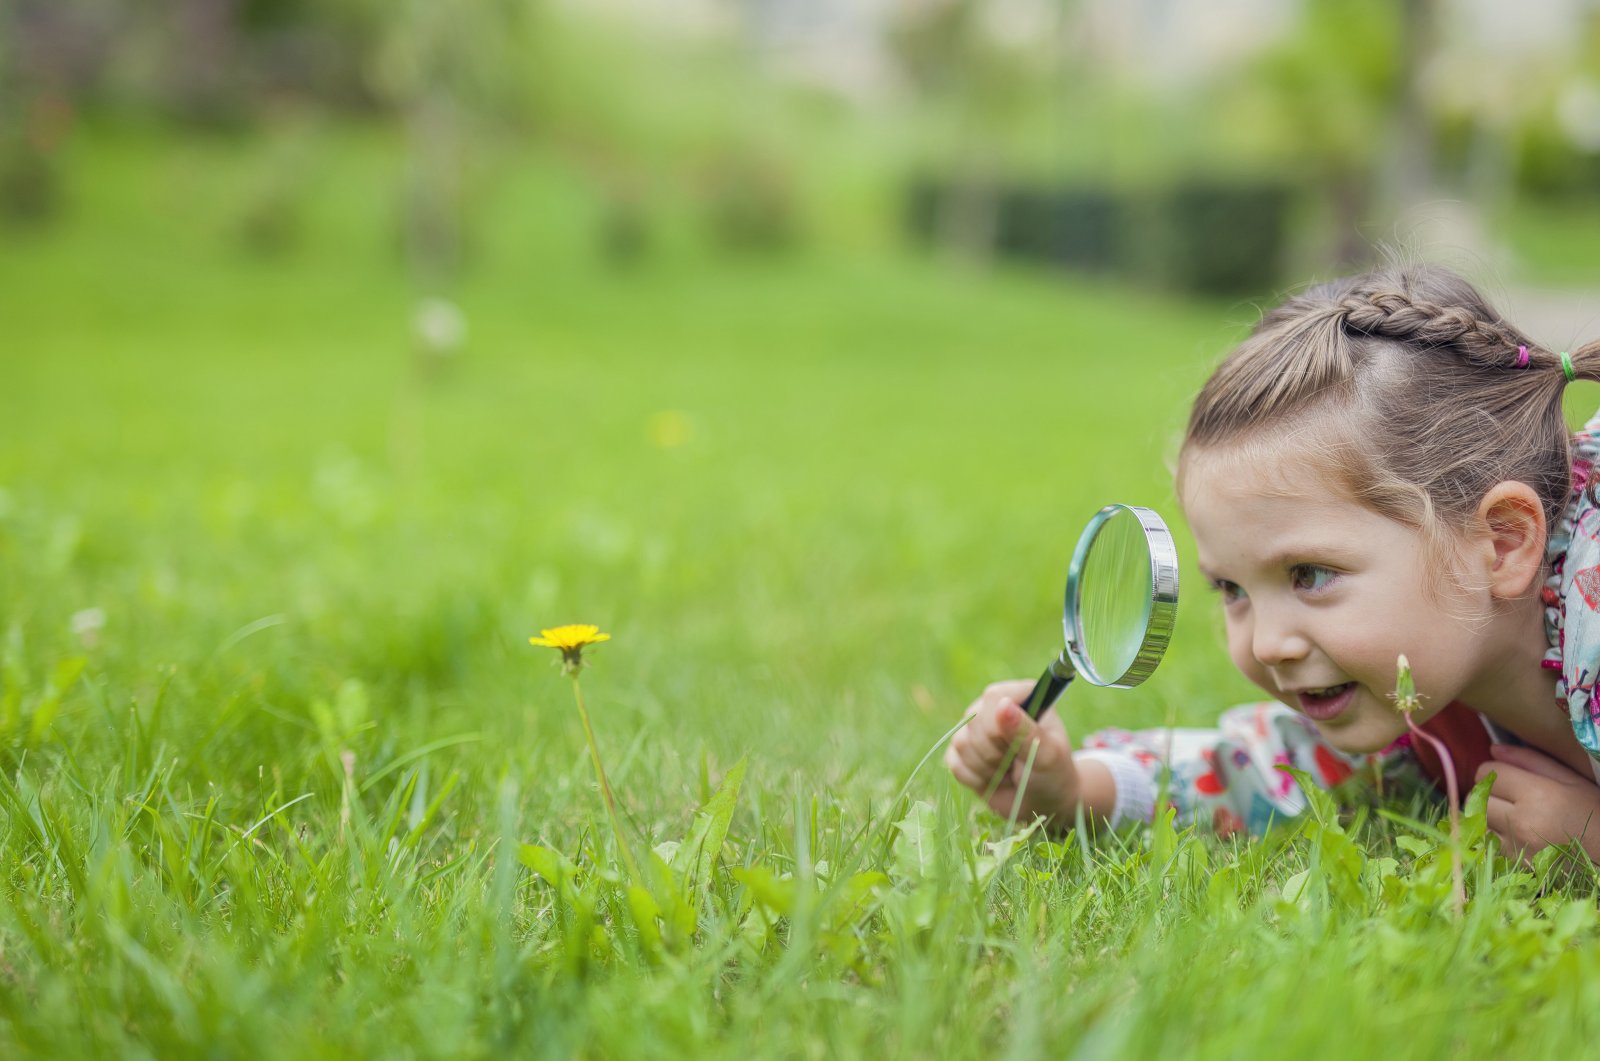 After a certain age, children start to examine their surroundings in more detail and begin asking a lot of questions out of curiosity. (Shutterstock Photo)